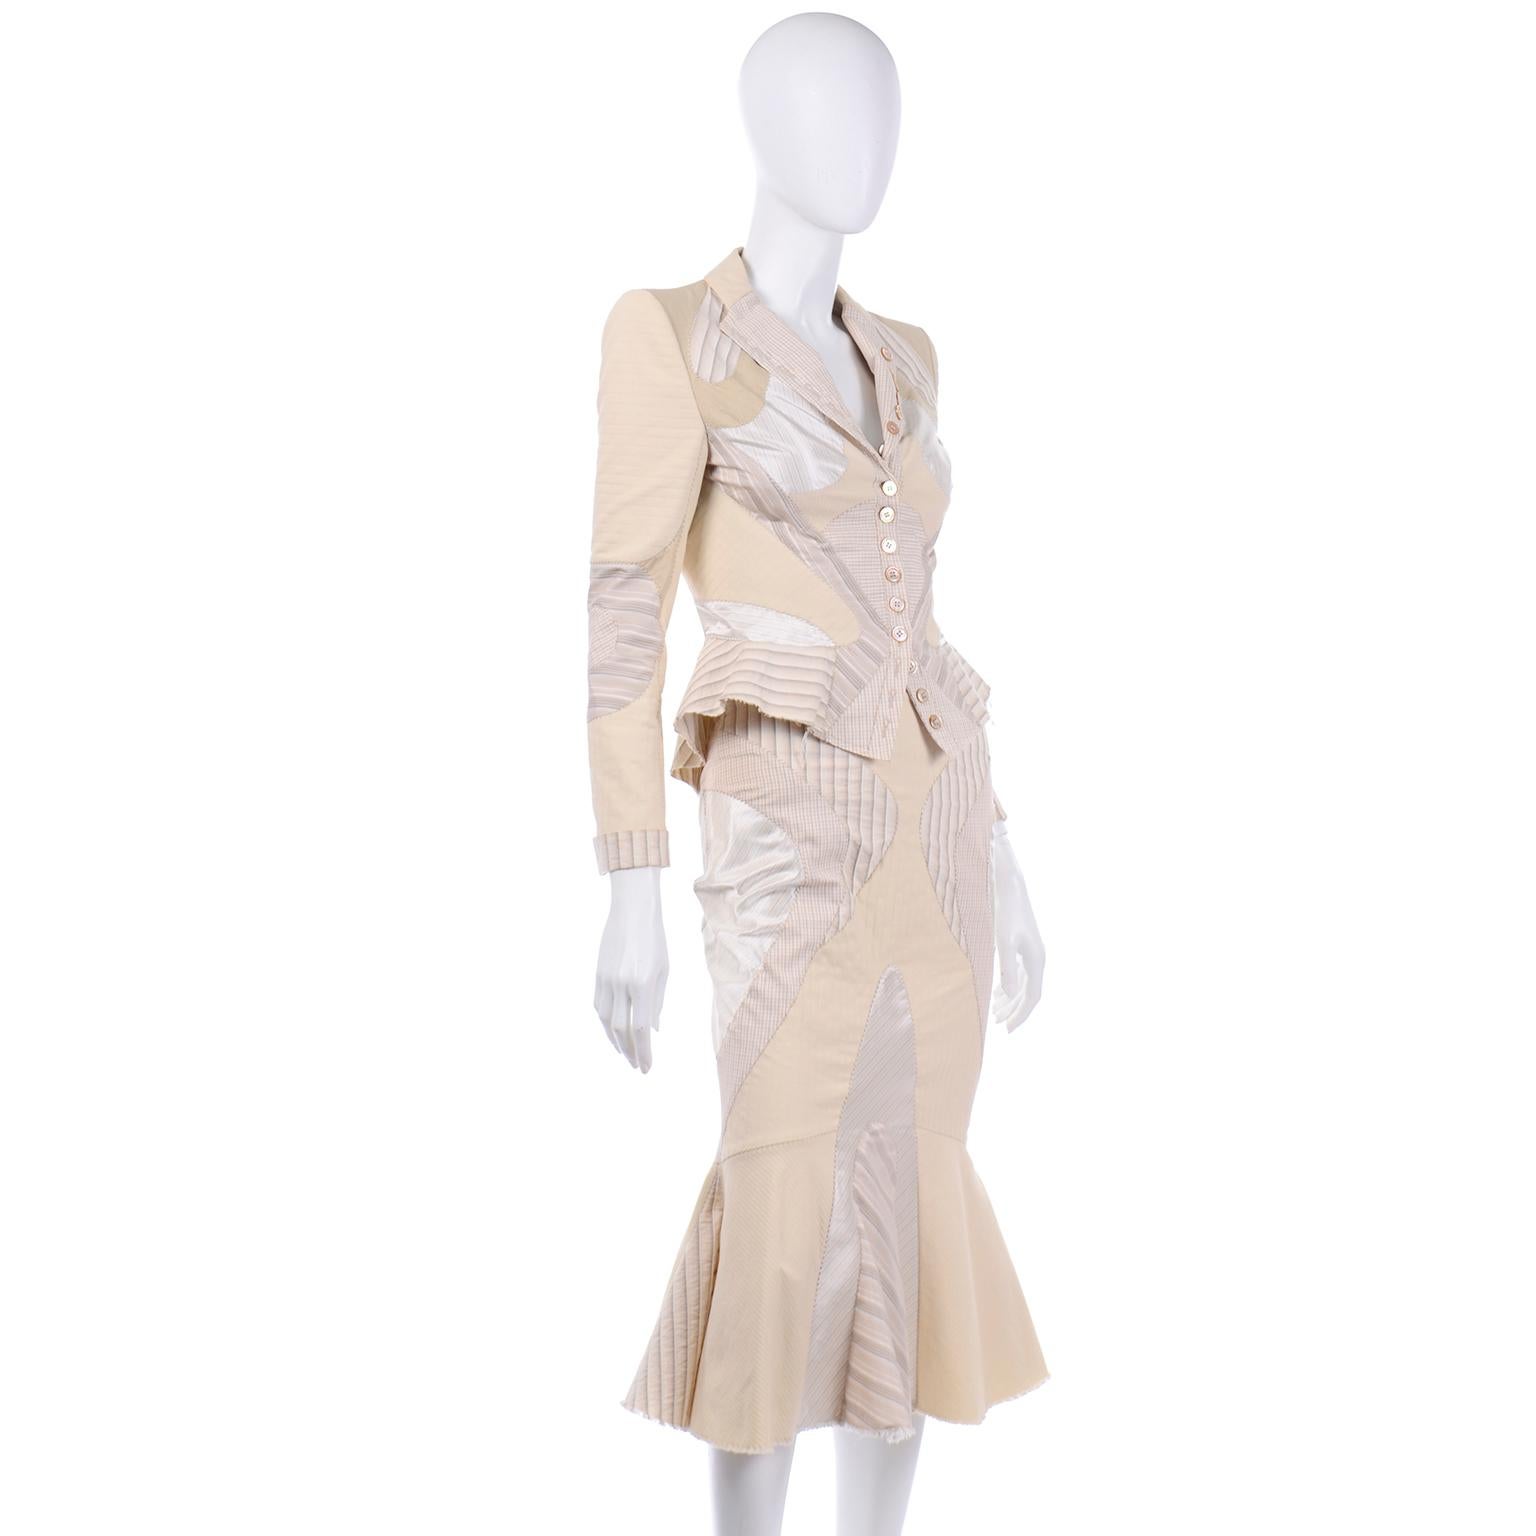 Alexander McQueen Spring 2004 Deliverance Patchwork 2pc Skirt & Jacket Outfit  1